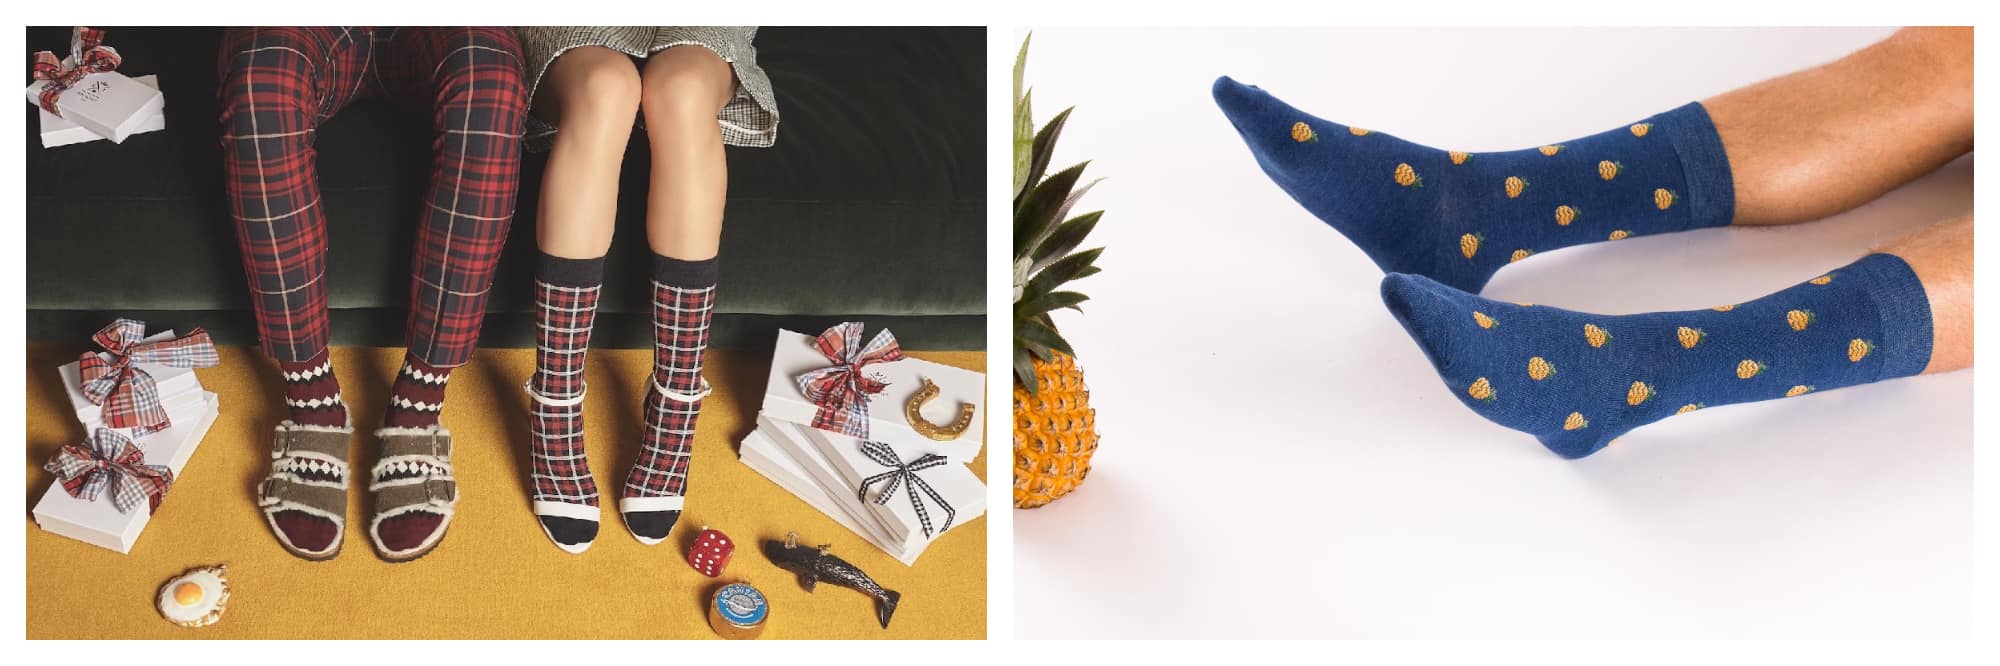 On the left there are two sets of legs depicting two people sitting down, wearing Christmas socks - one dressed in plaid trousers and one in a short skirt, both surrounded by Christmas presents and various items. On the right is a set of bare male legs from the knee down, reclining on the floor with blue socks decorated with little pineapples on them. There is a pineapple just next to the person's feet.